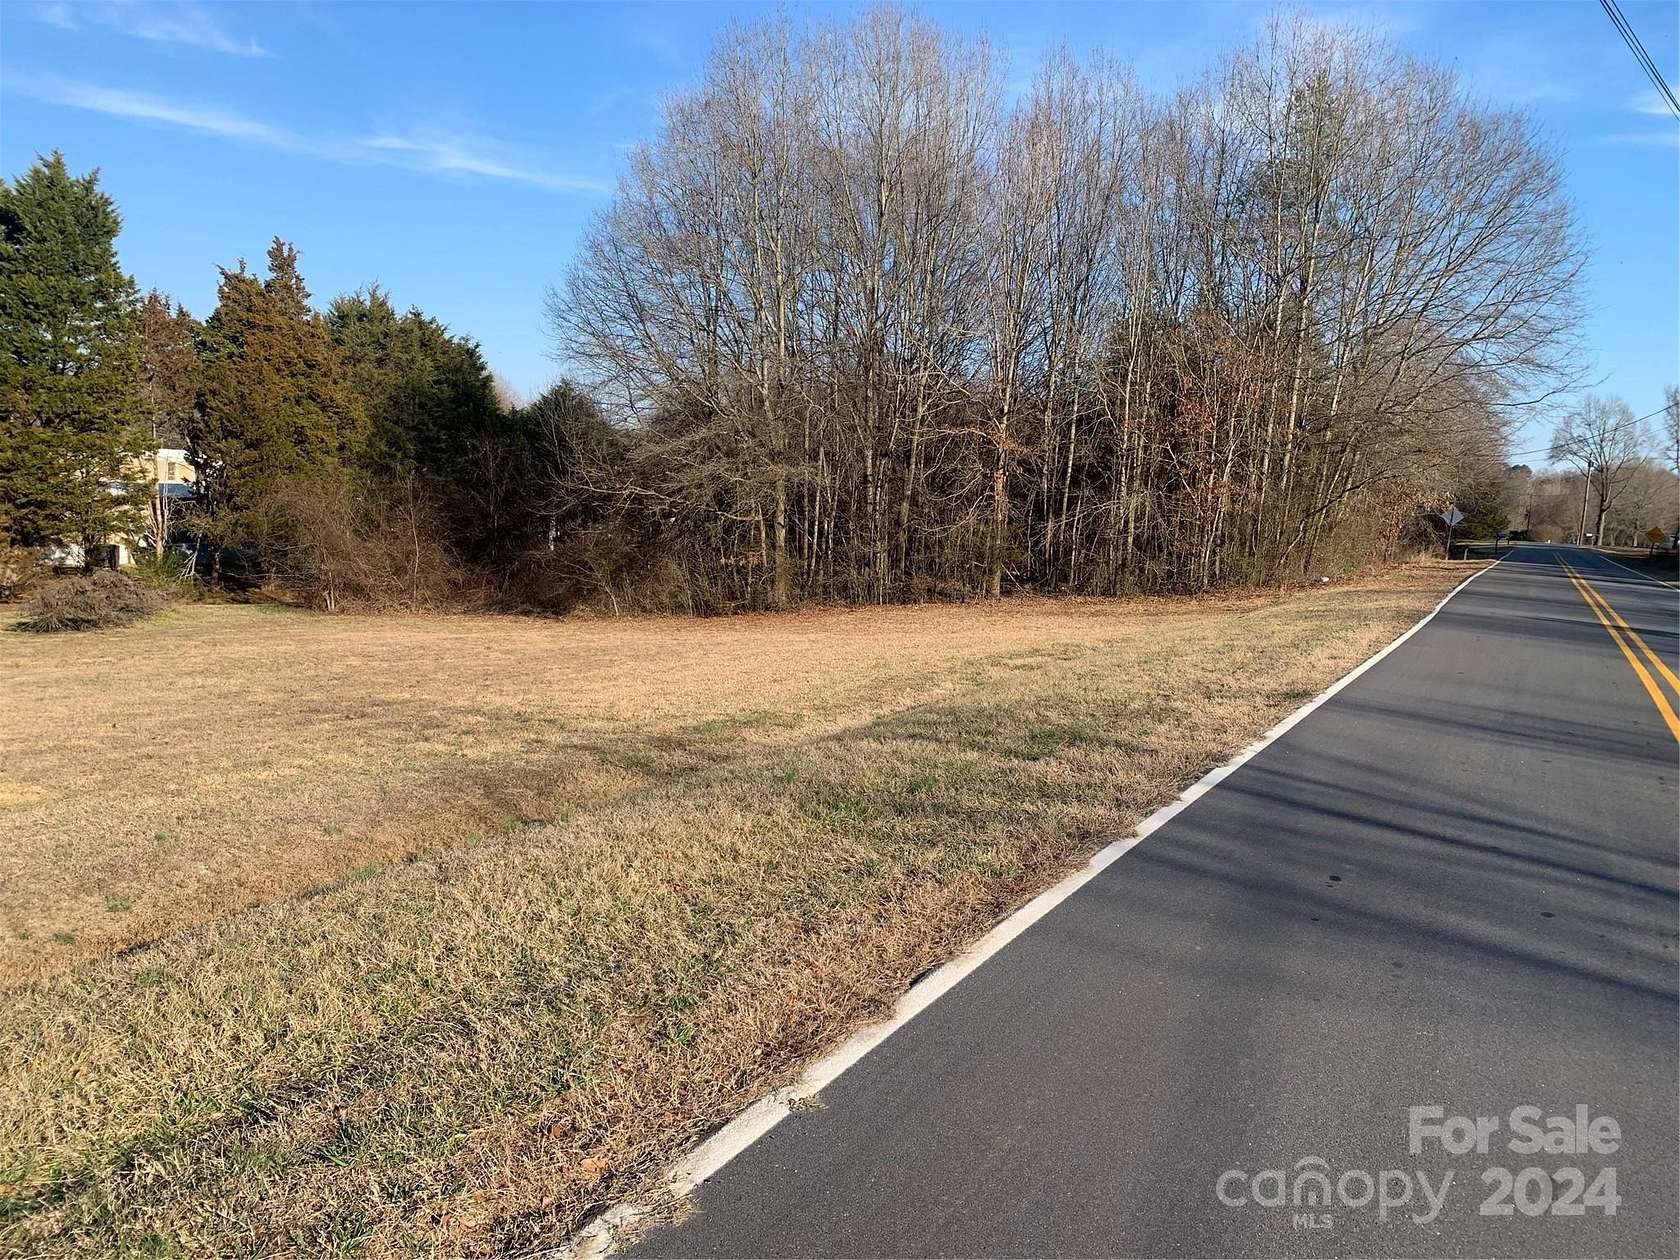 0.97 Acres of Land for Sale in Hickory, North Carolina